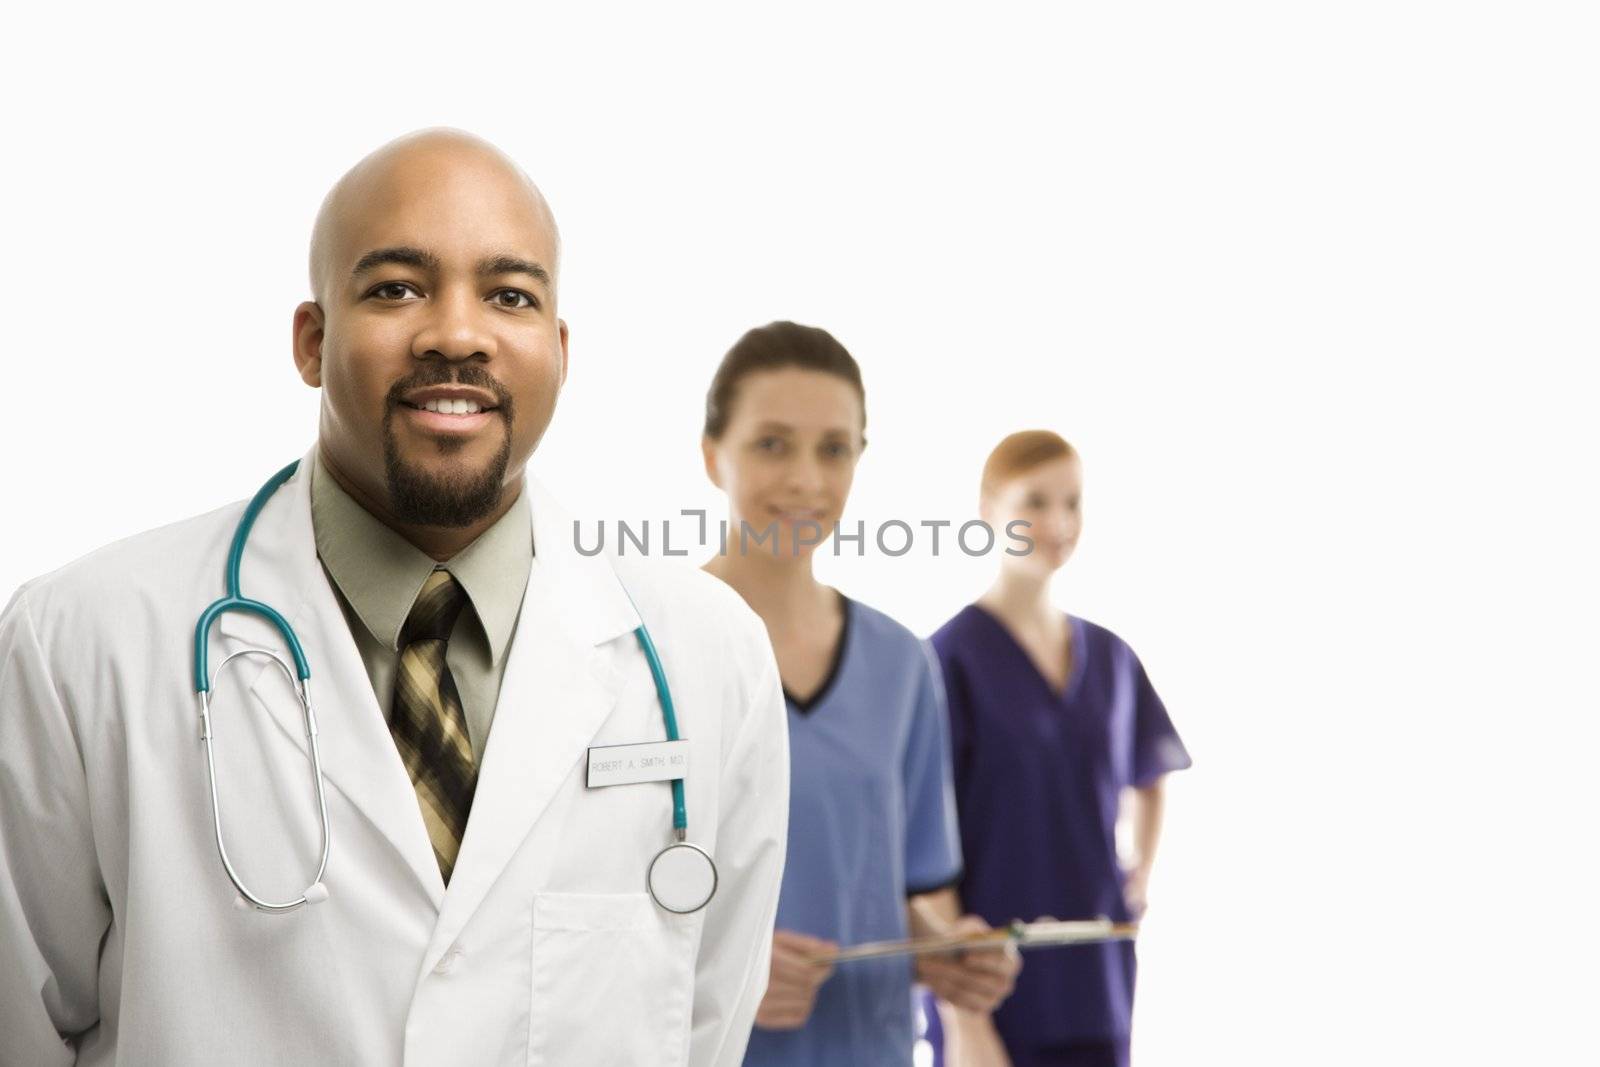 Portrait of smiling African-American man and Caucasian women medical healthcare workers in uniforms standing against white background.